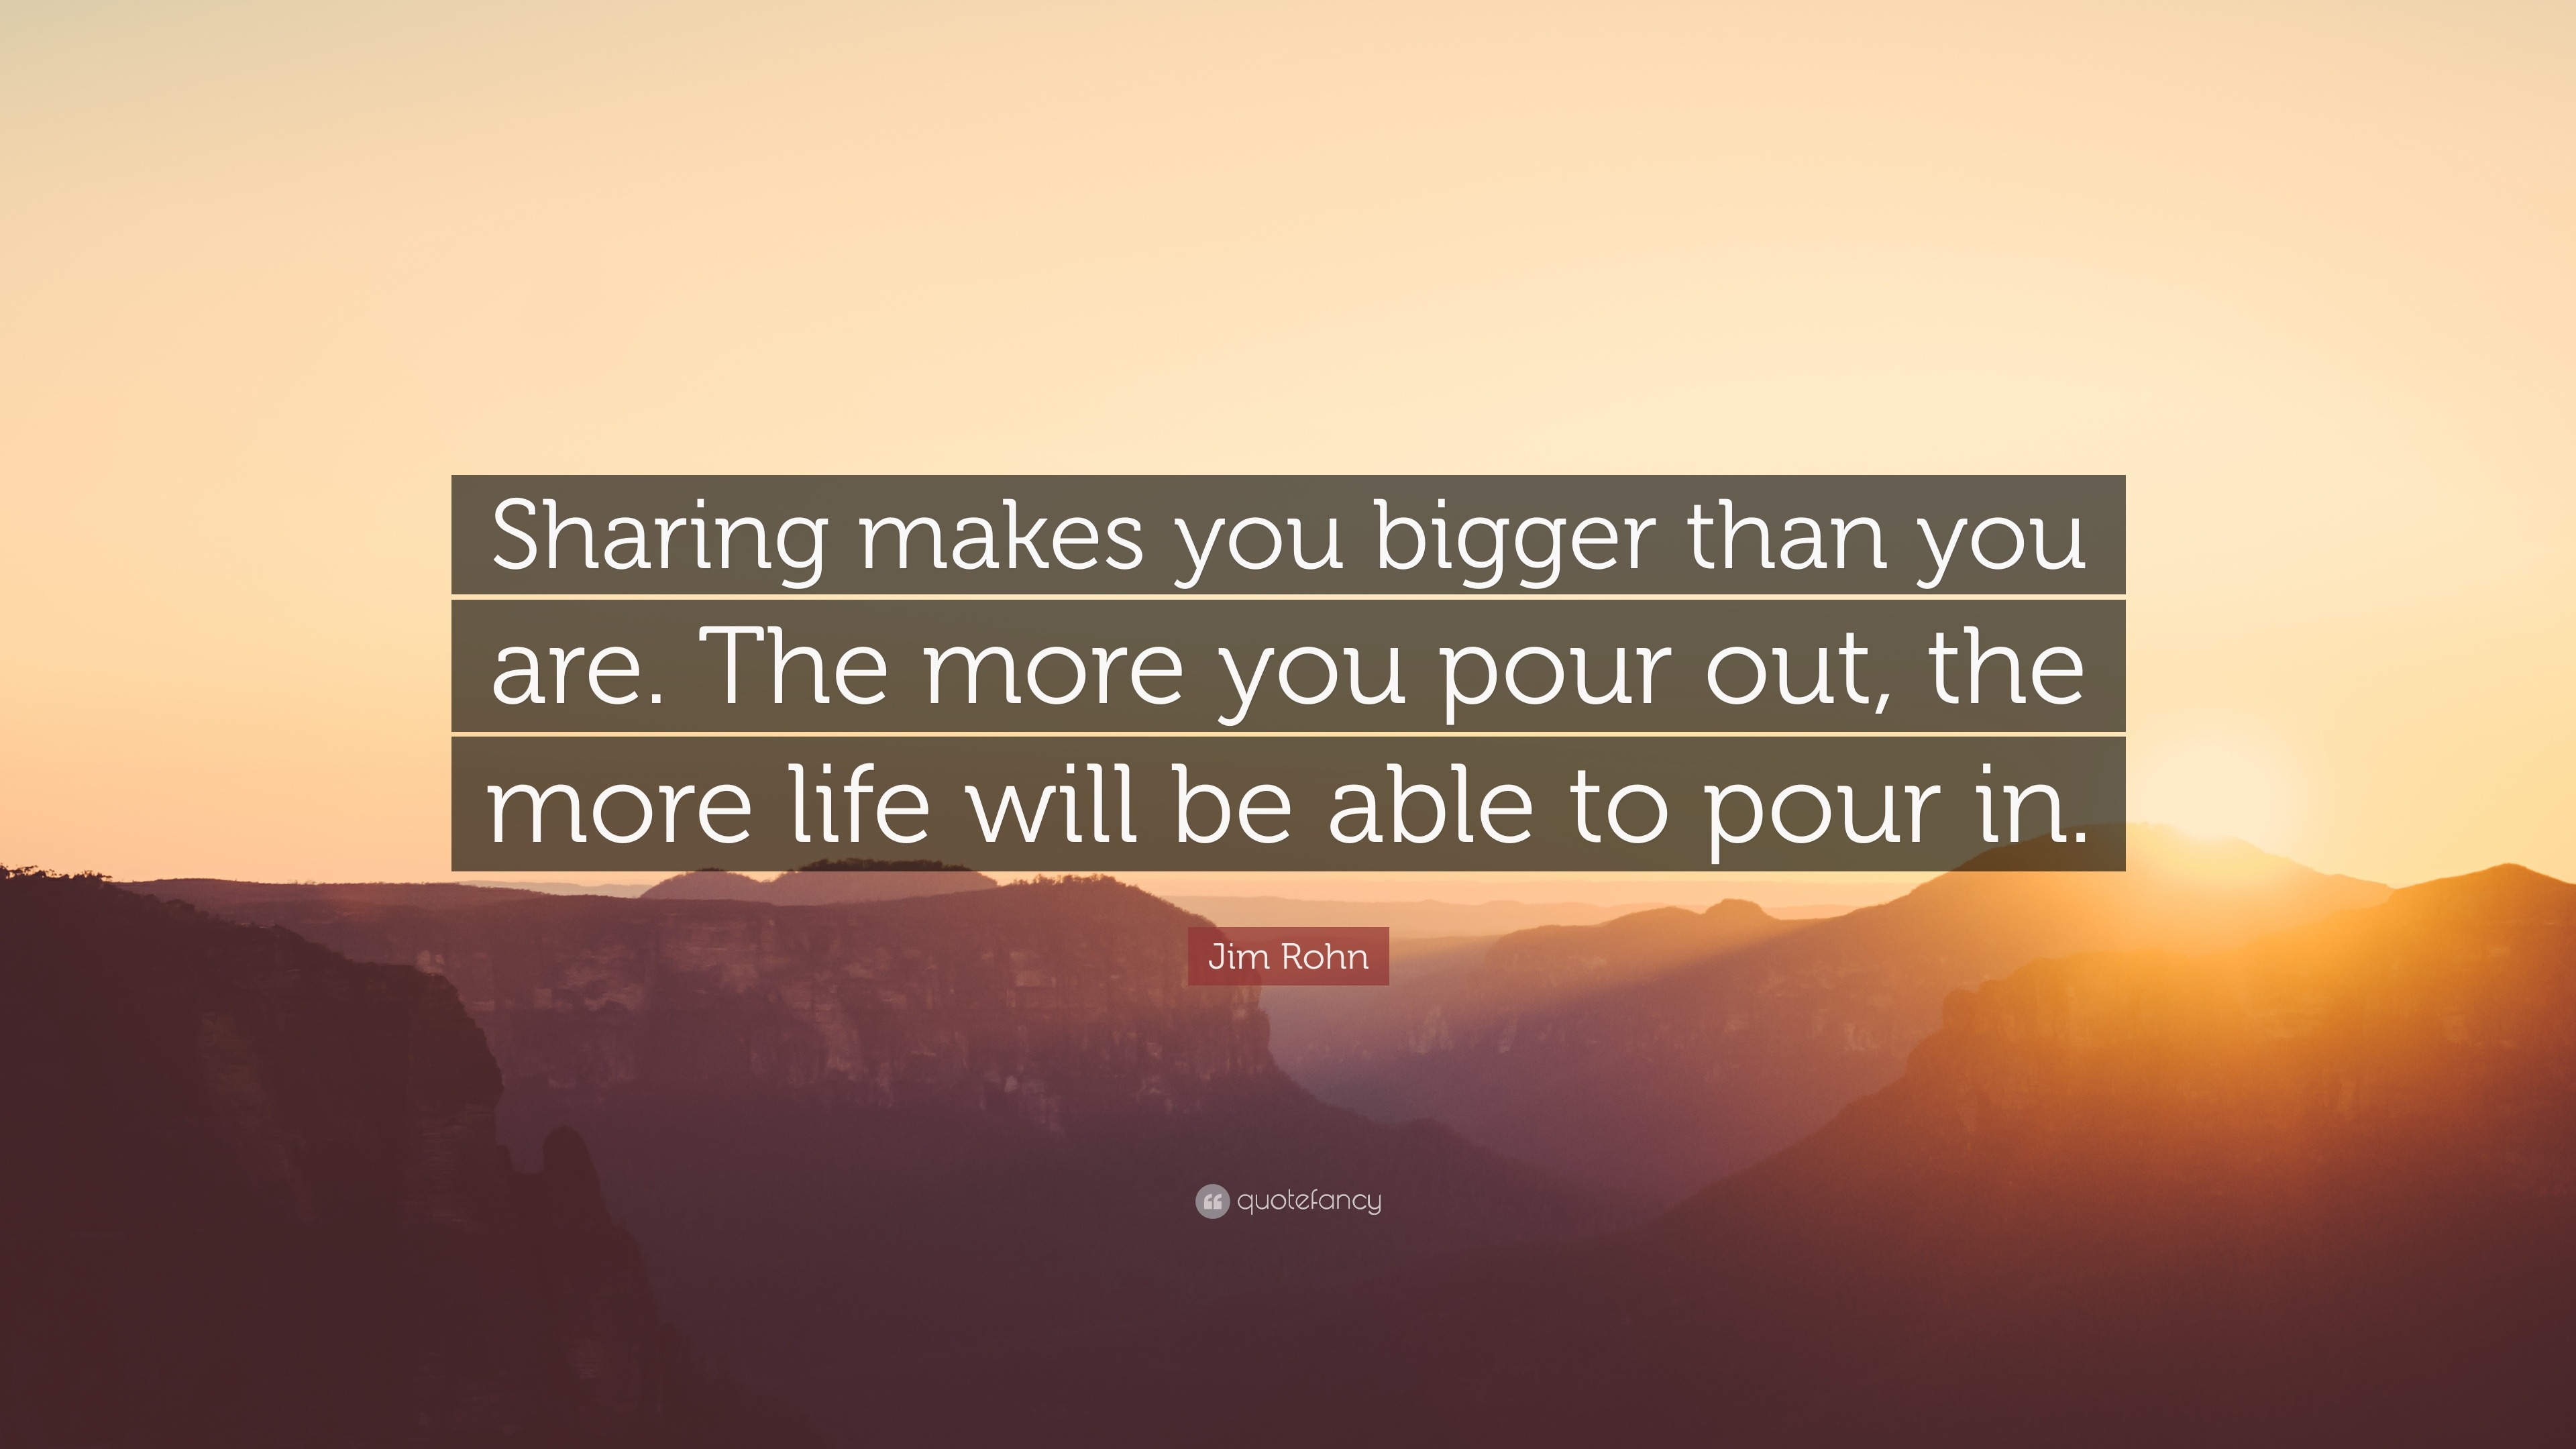 The Power of Sharing: The More You Share, the More You Will Have